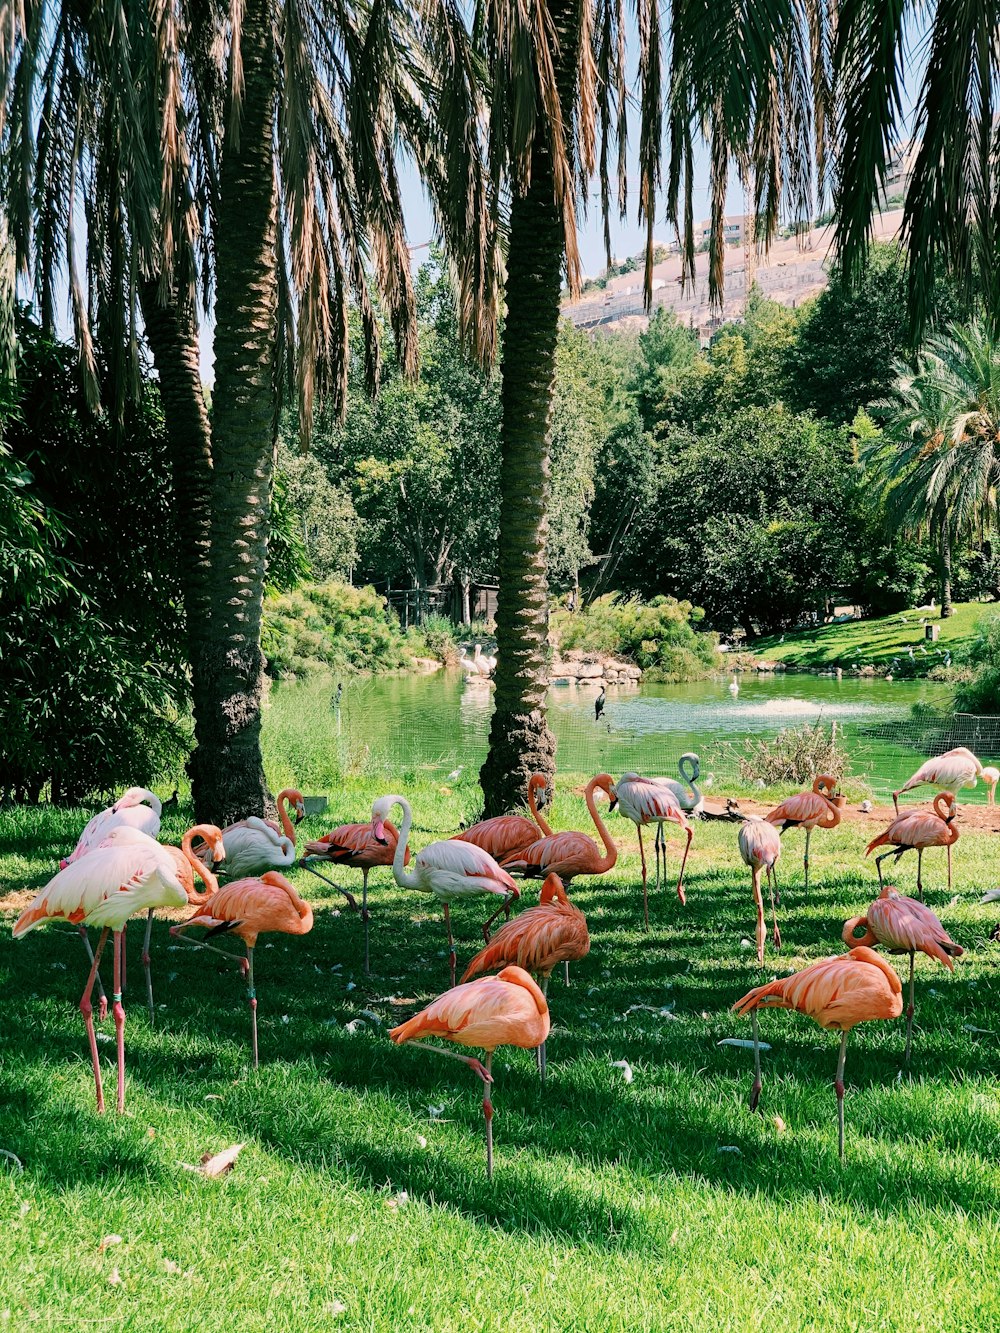 flock of flamingos on green grass field during daytime